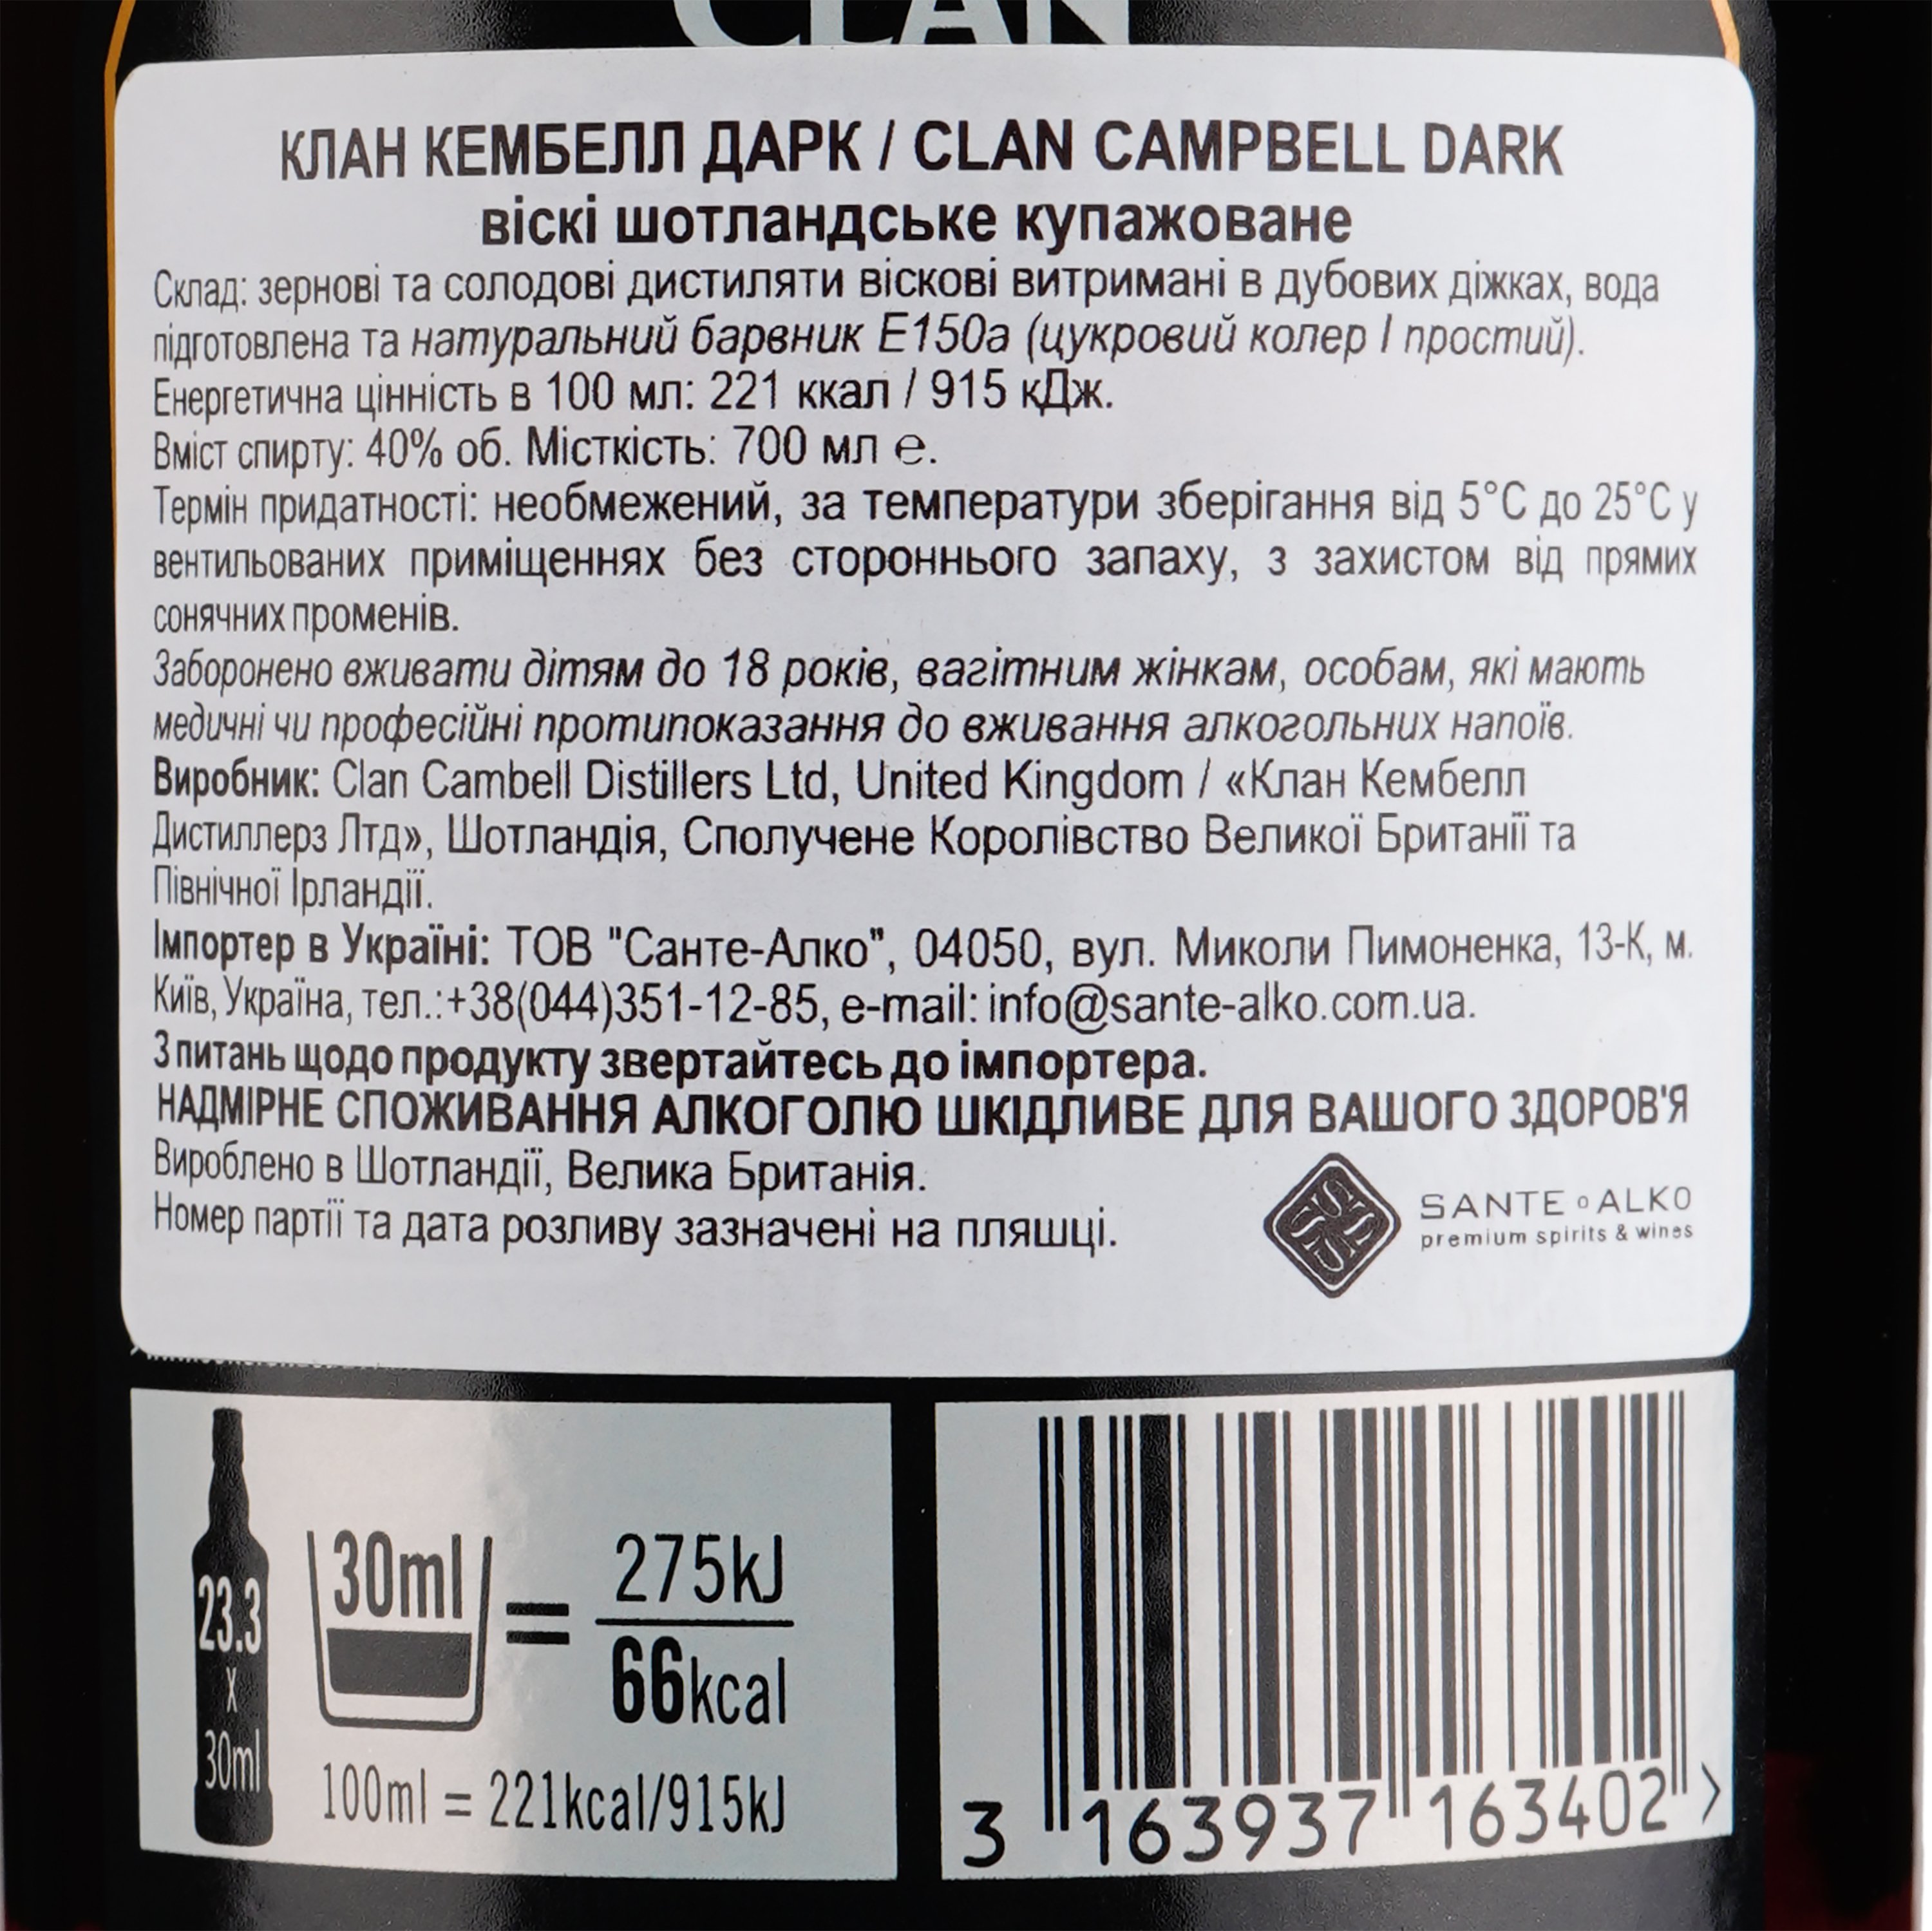 Виски Clan Campbell Dark Blended Scotch Whisky 40% 0.7 л - фото 3